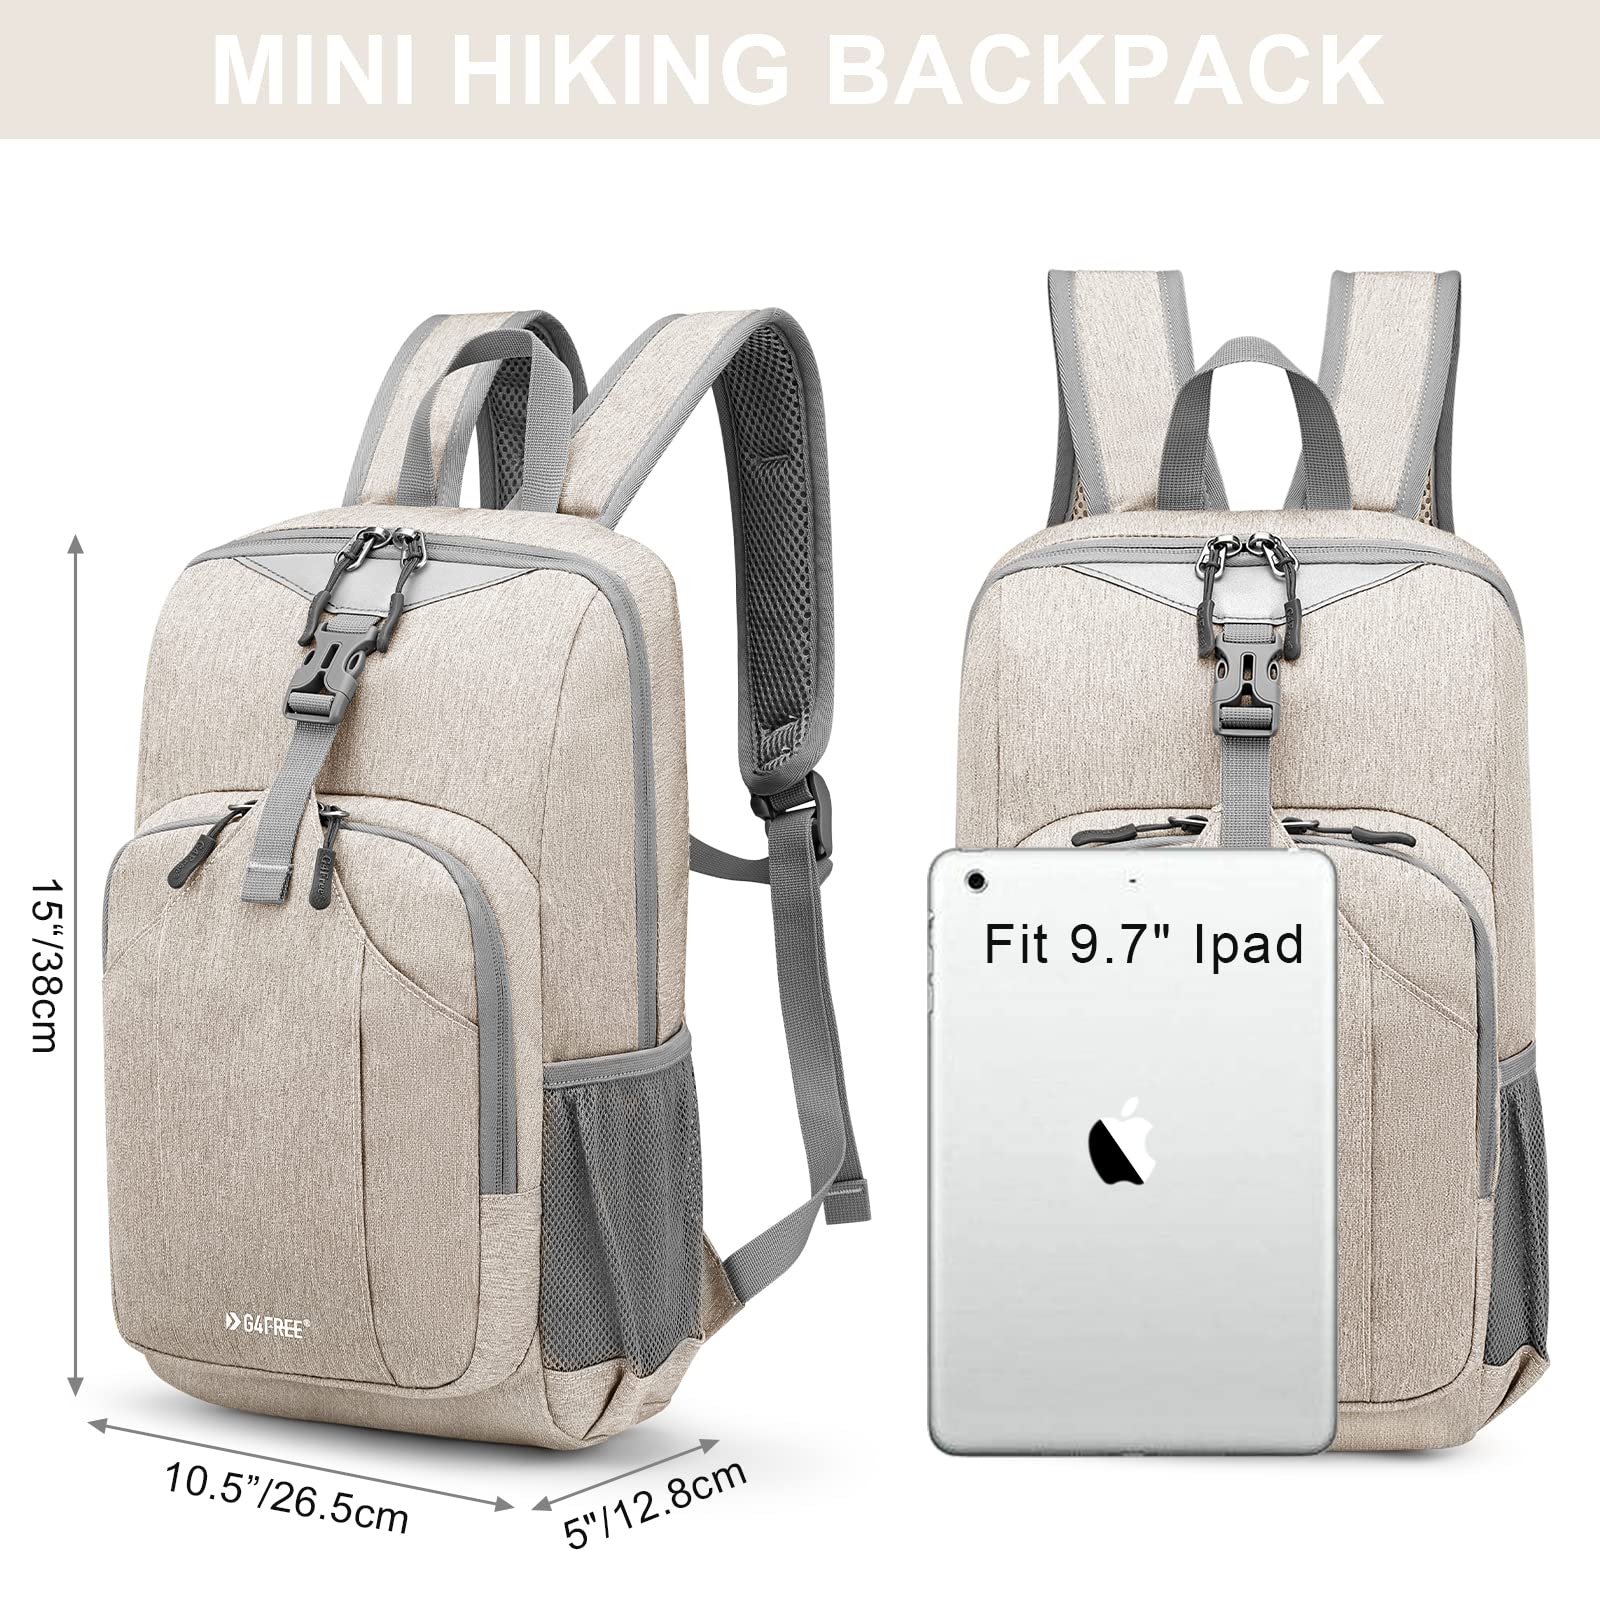 G4Free Mini 10L Hiking Daypack Small Hiking Backpack Cycling Compact Shoulder Backpack Outdoor for Men Women(Ivory)